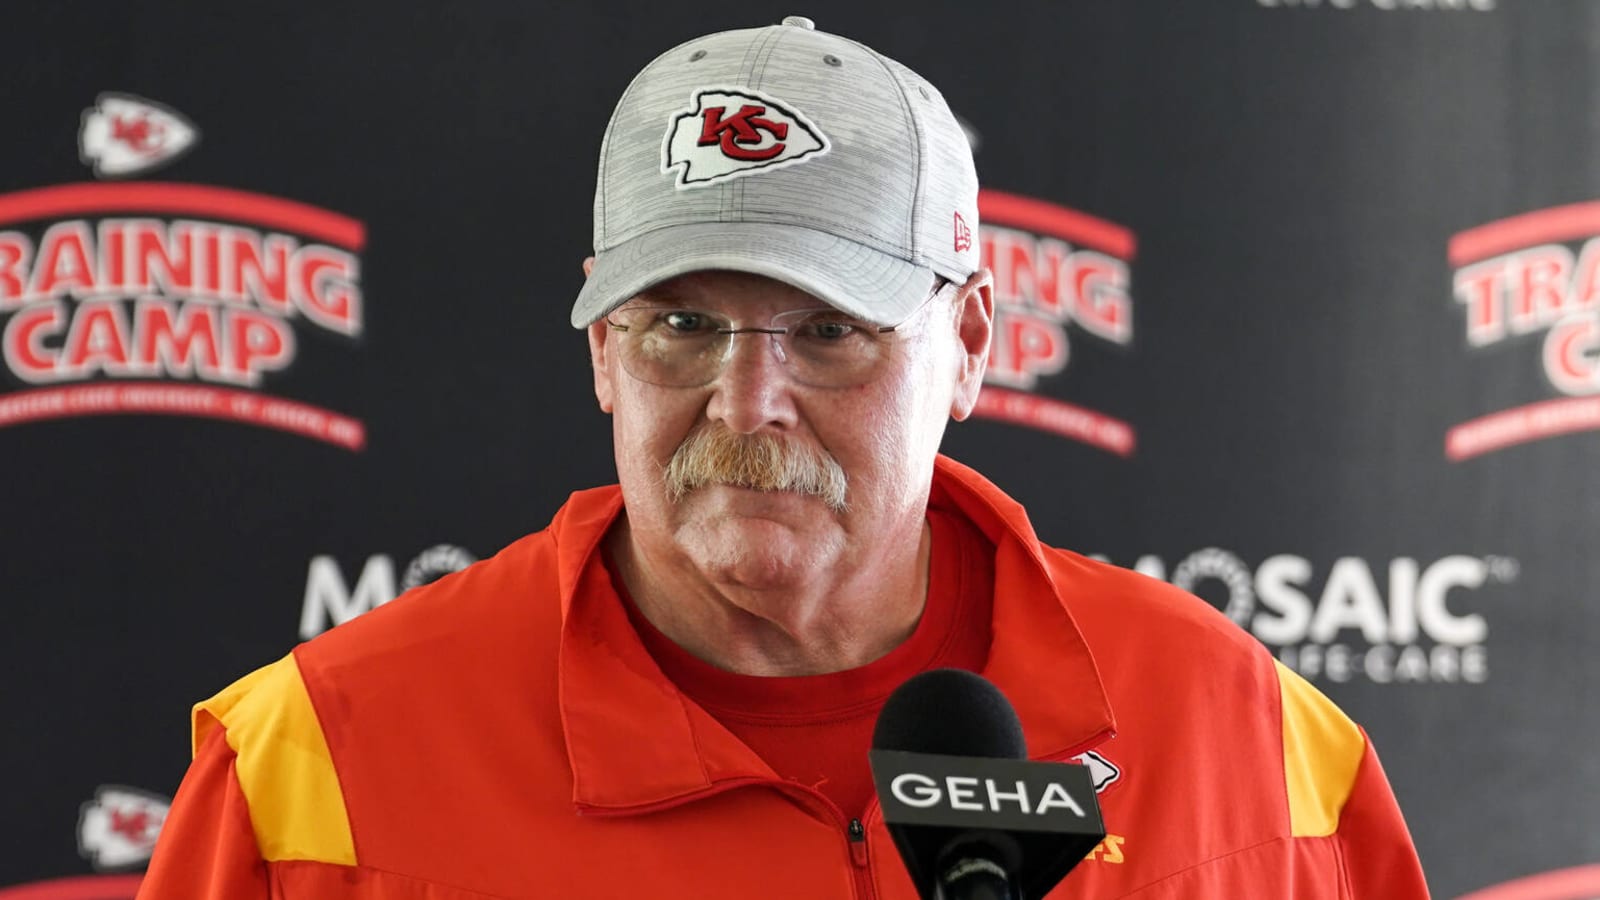 Andy Reid spoke with Pro Bowler Frank Clark about lifestyle changes